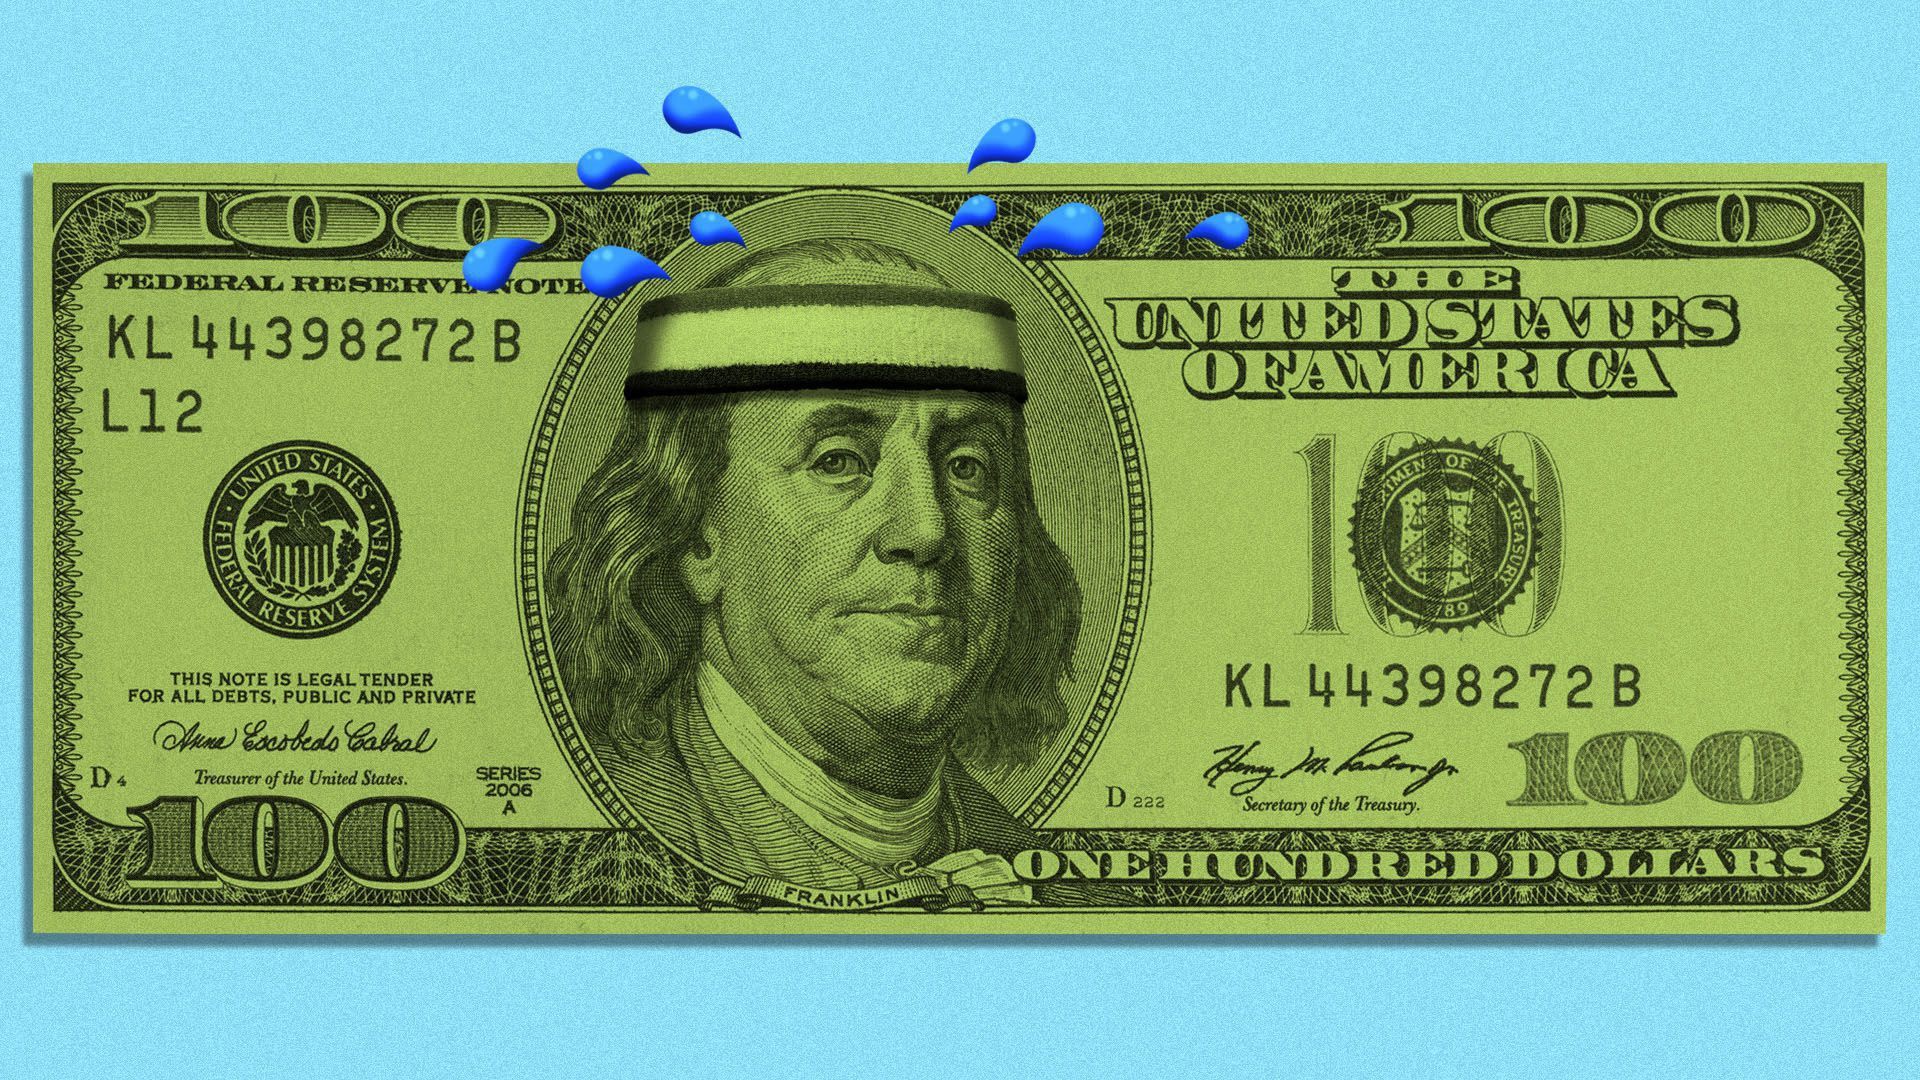 Illustration of Benjamin Franklin on a hundred dollar wearing a sweatband and sweating